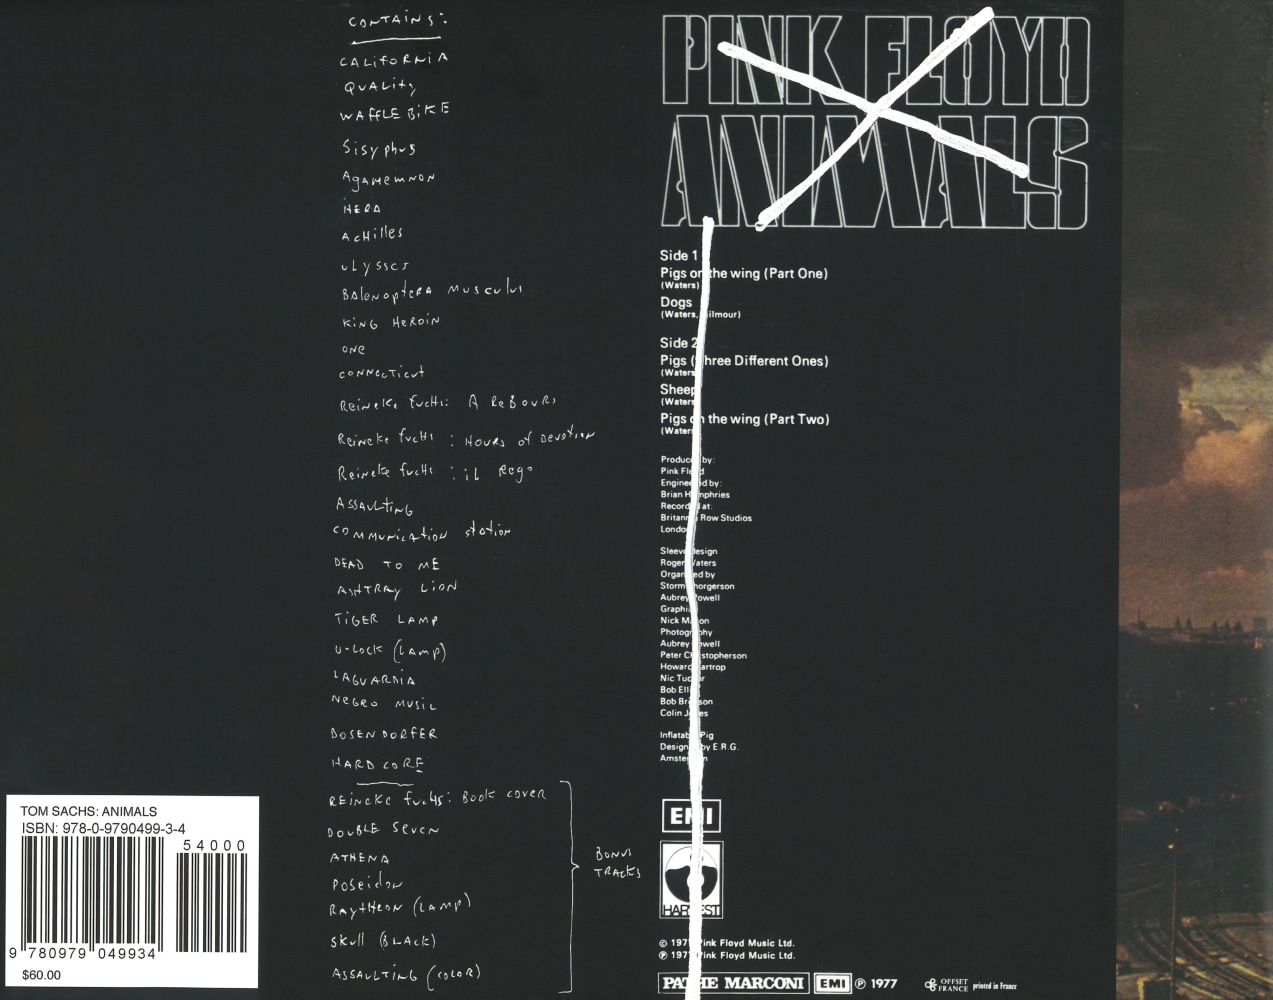 back cover of catalogue